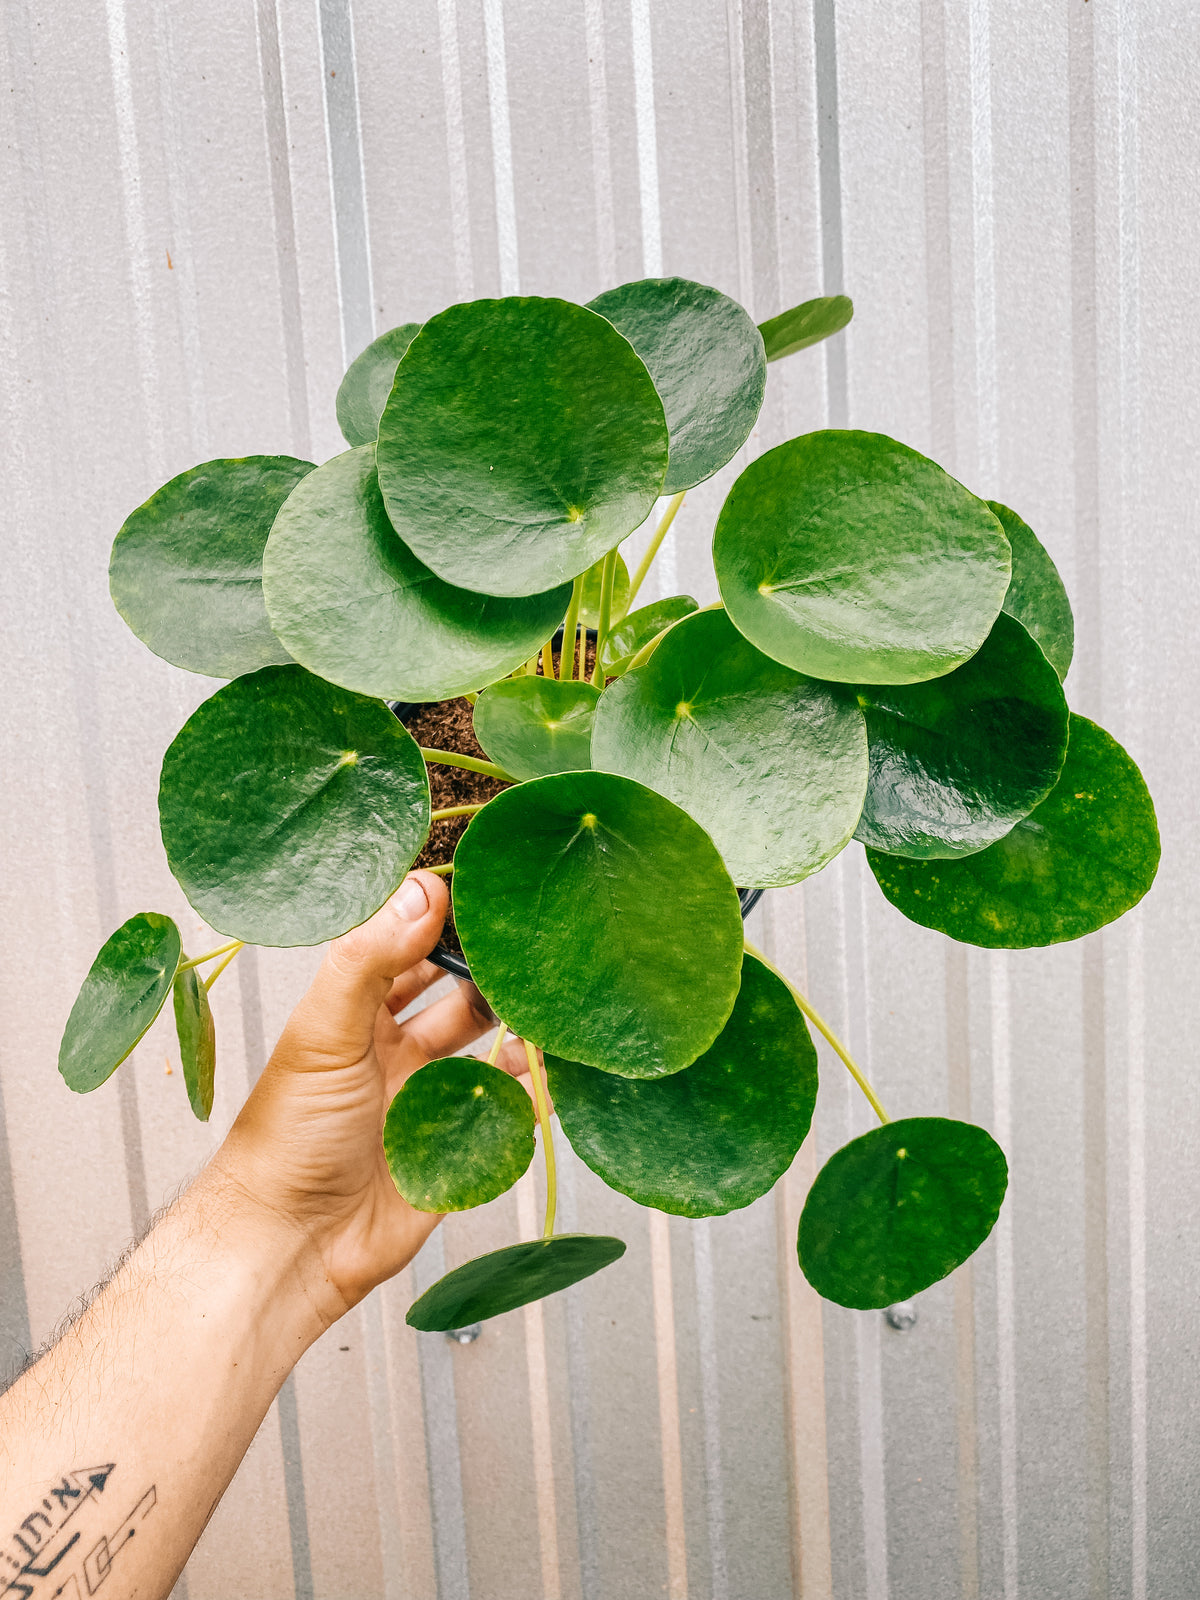 6" Pilea Peperomioides 'Chinese Money Coin’